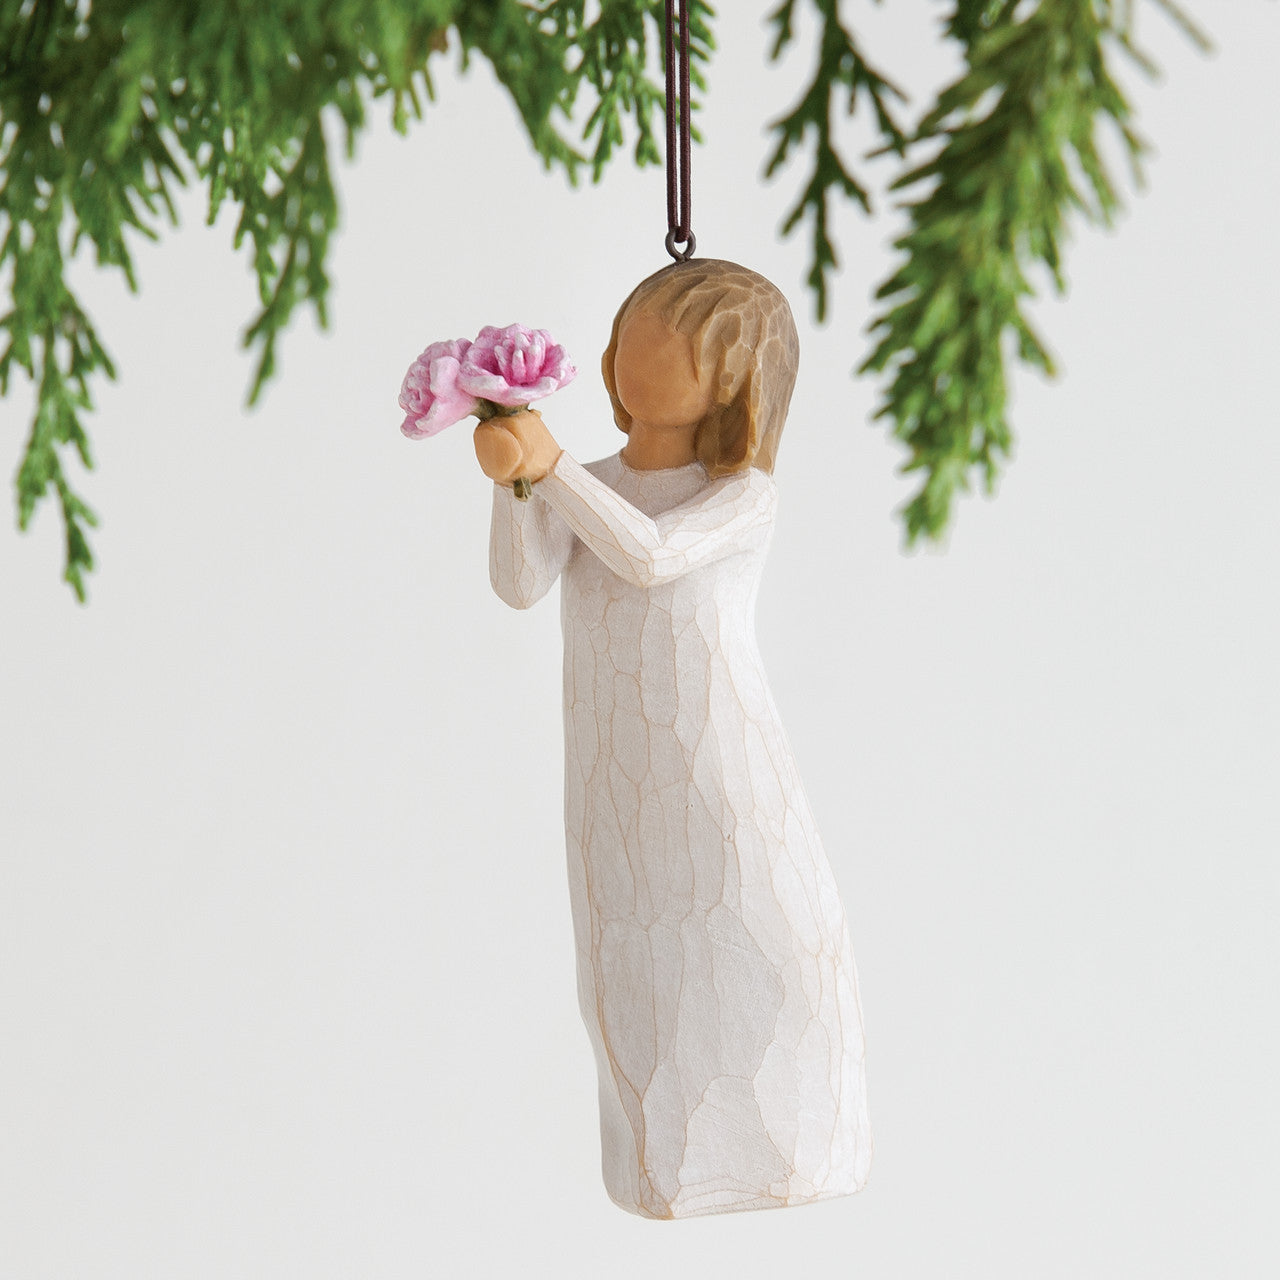 Willow Tree® Thank You Ornament by Demdaco Ornament Willow Tree   